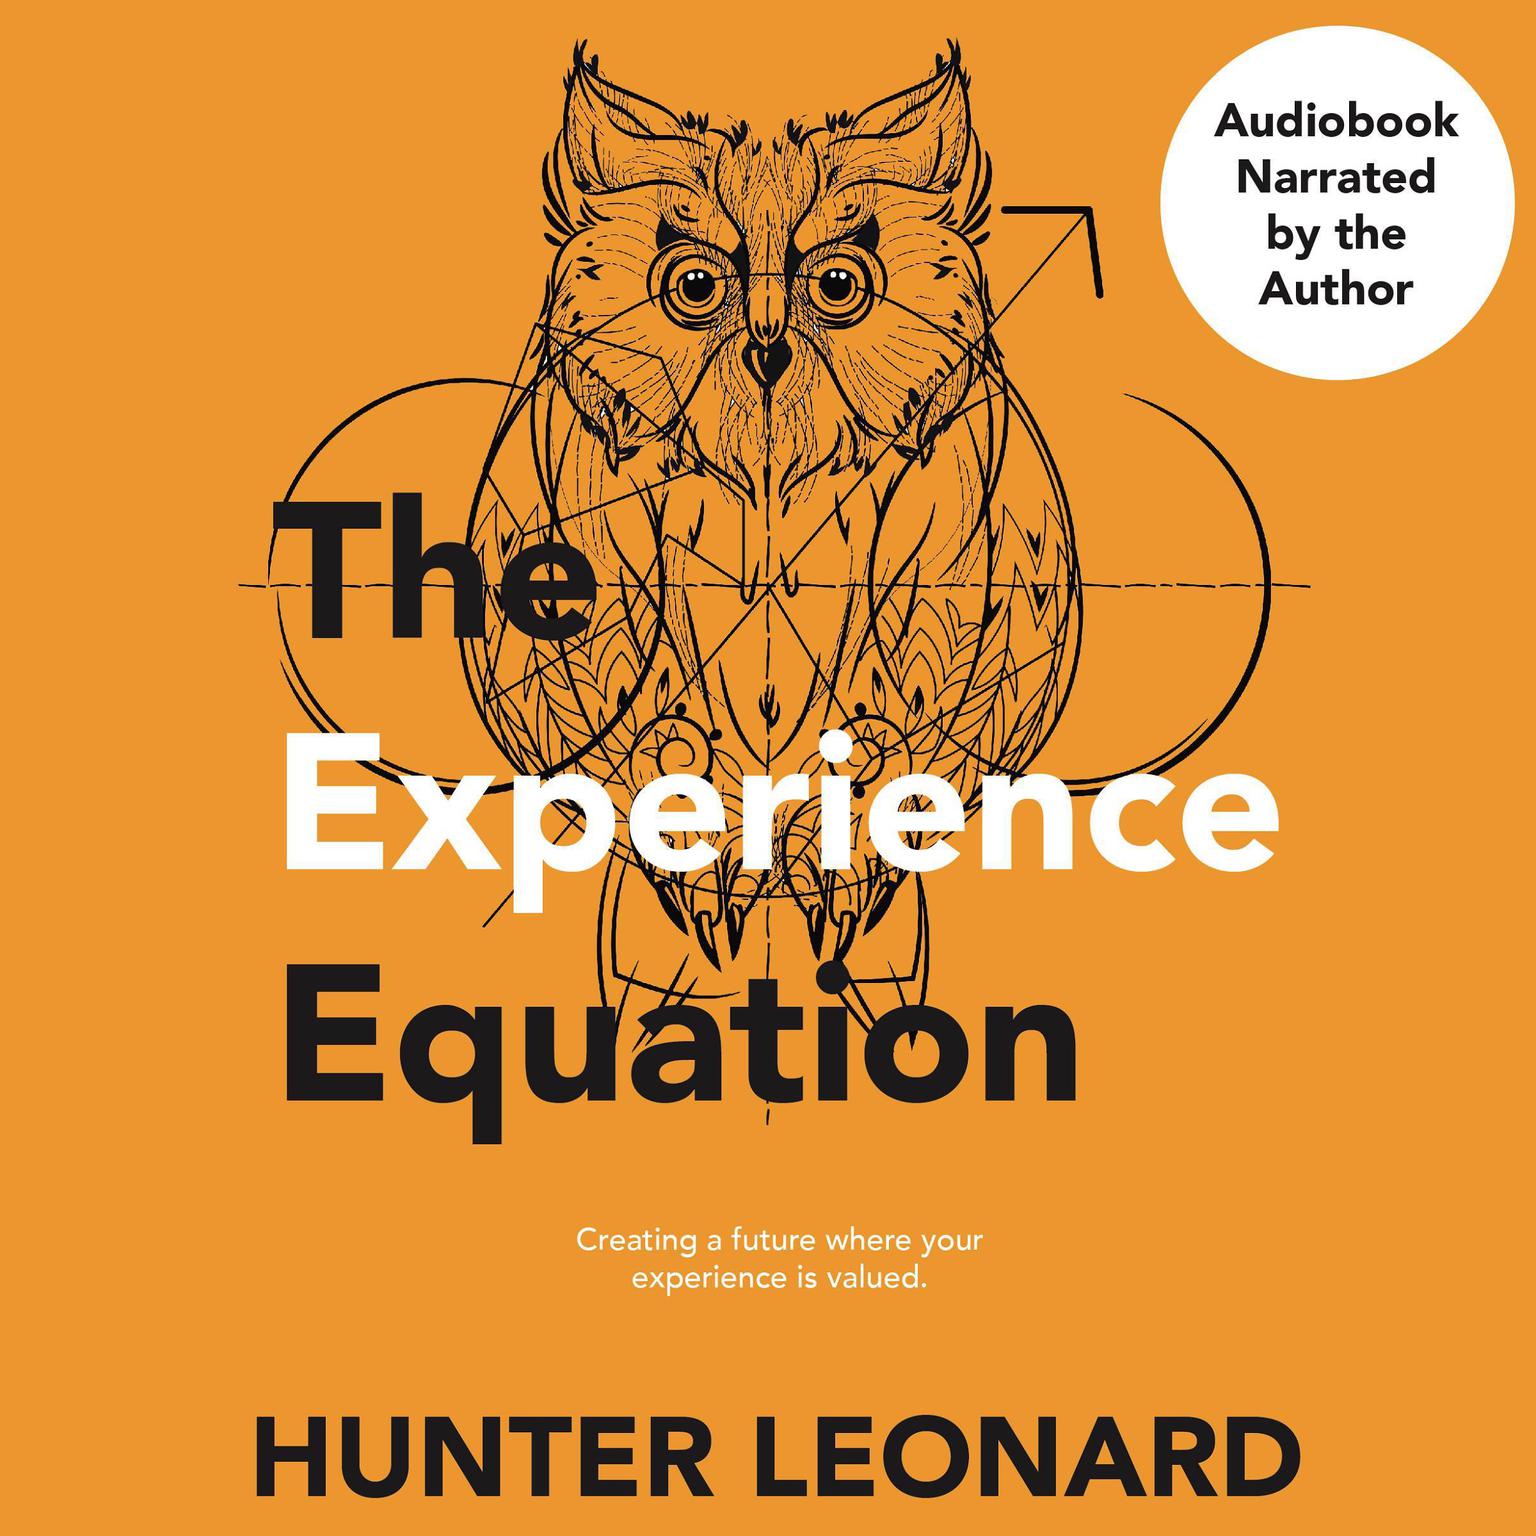 The Experience Equation Audiobook, by Hunter Leonard